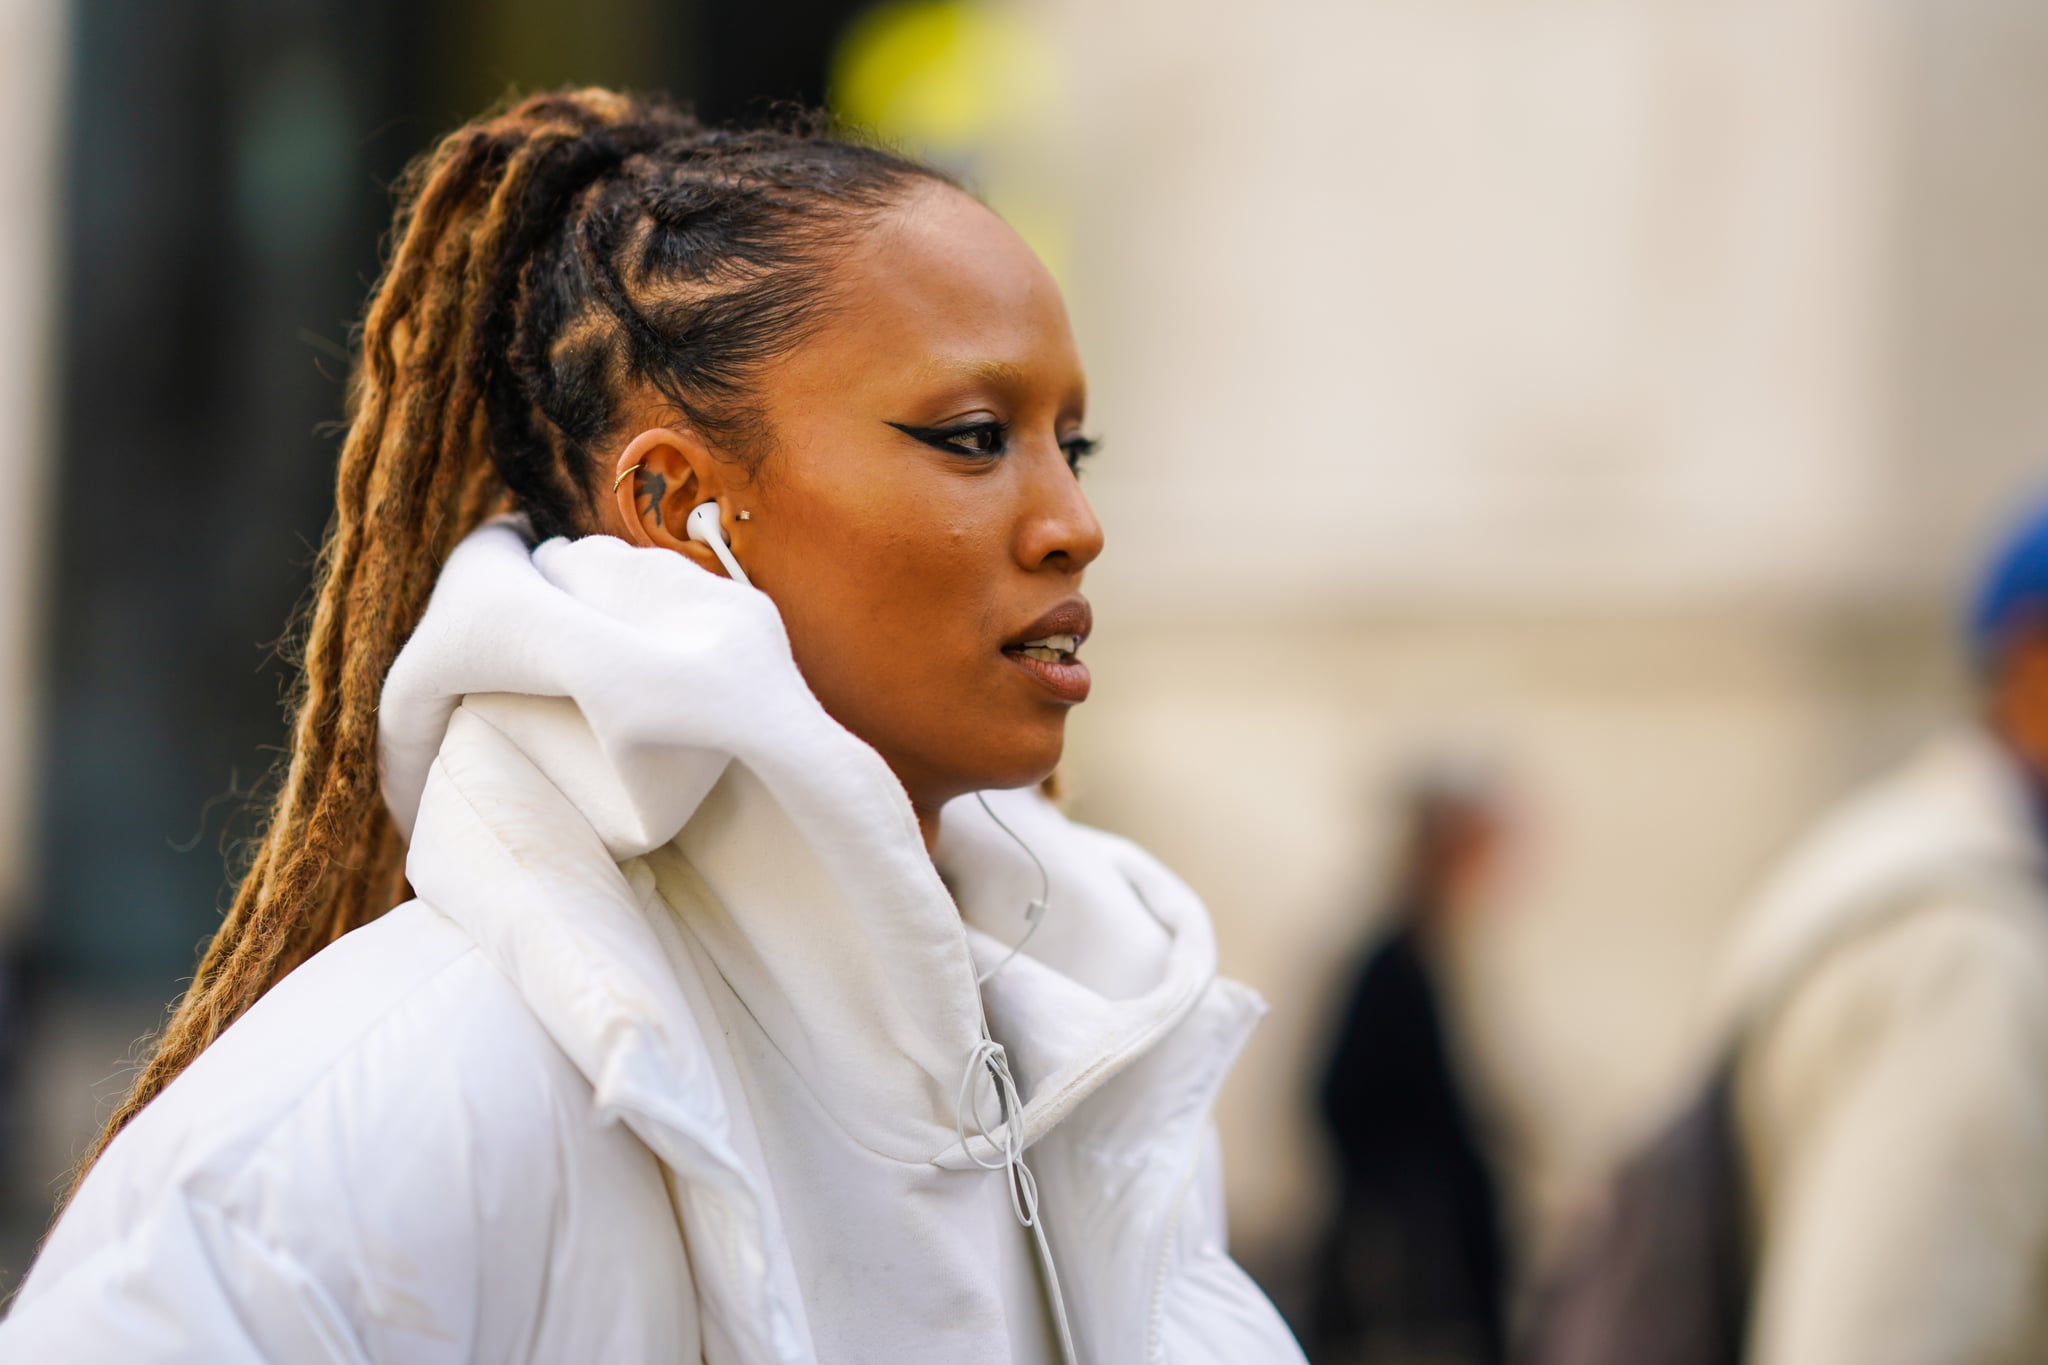 PARIS, FRANCE - OCTOBER 01: A guest wears a white hooded sweatshirt, outside Chloe, during Paris Fashion Week - Womenswear Spring Summer 2021, on October 01, 2020 in Paris, France. (Photo by Edward Berthelot/Getty Images)